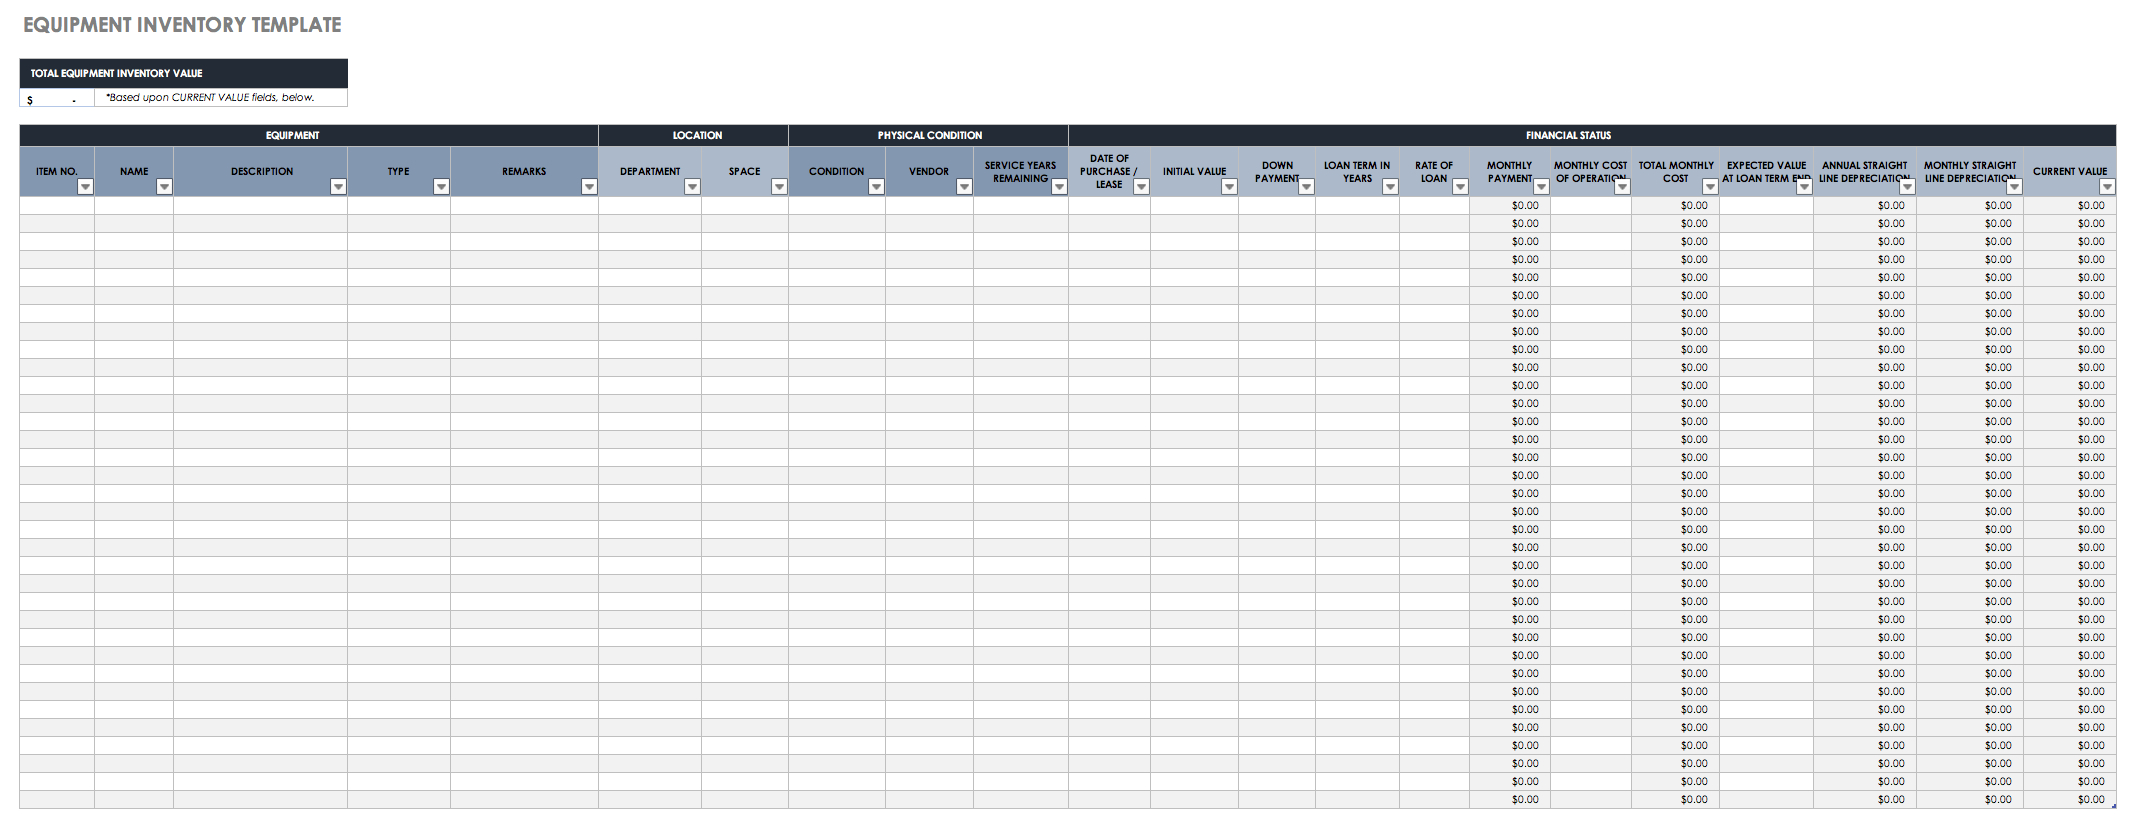 Inventory Spreadsheet Template Excel Product Tracking pertaining to Free Excel Inventory Templates